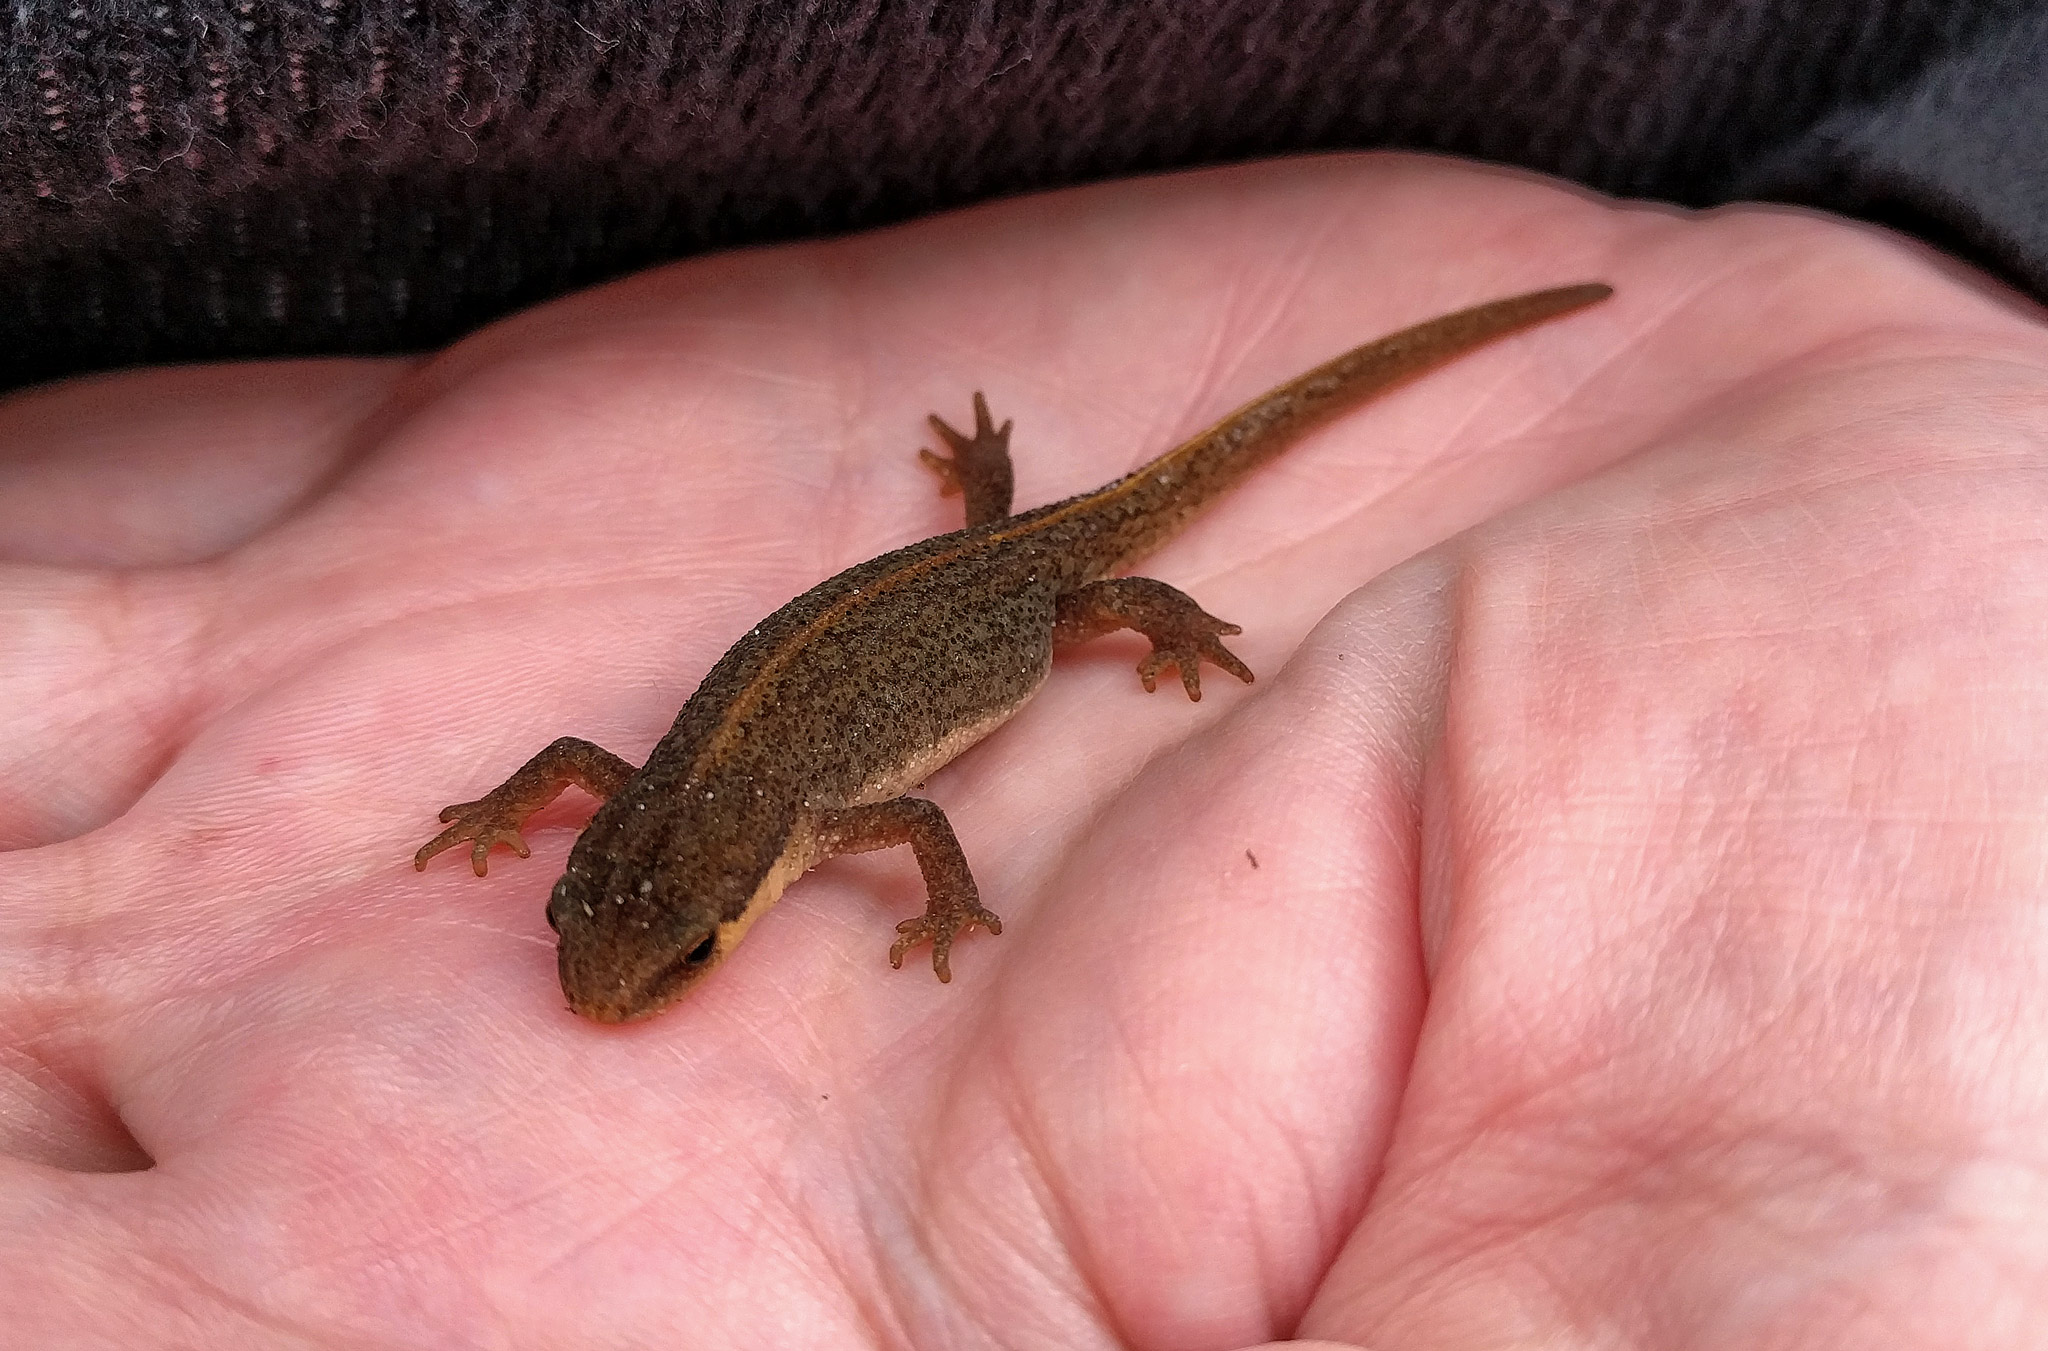 Tina was out in the garden when she spotted this Smooth Newt. Aw, cute, er, newt!